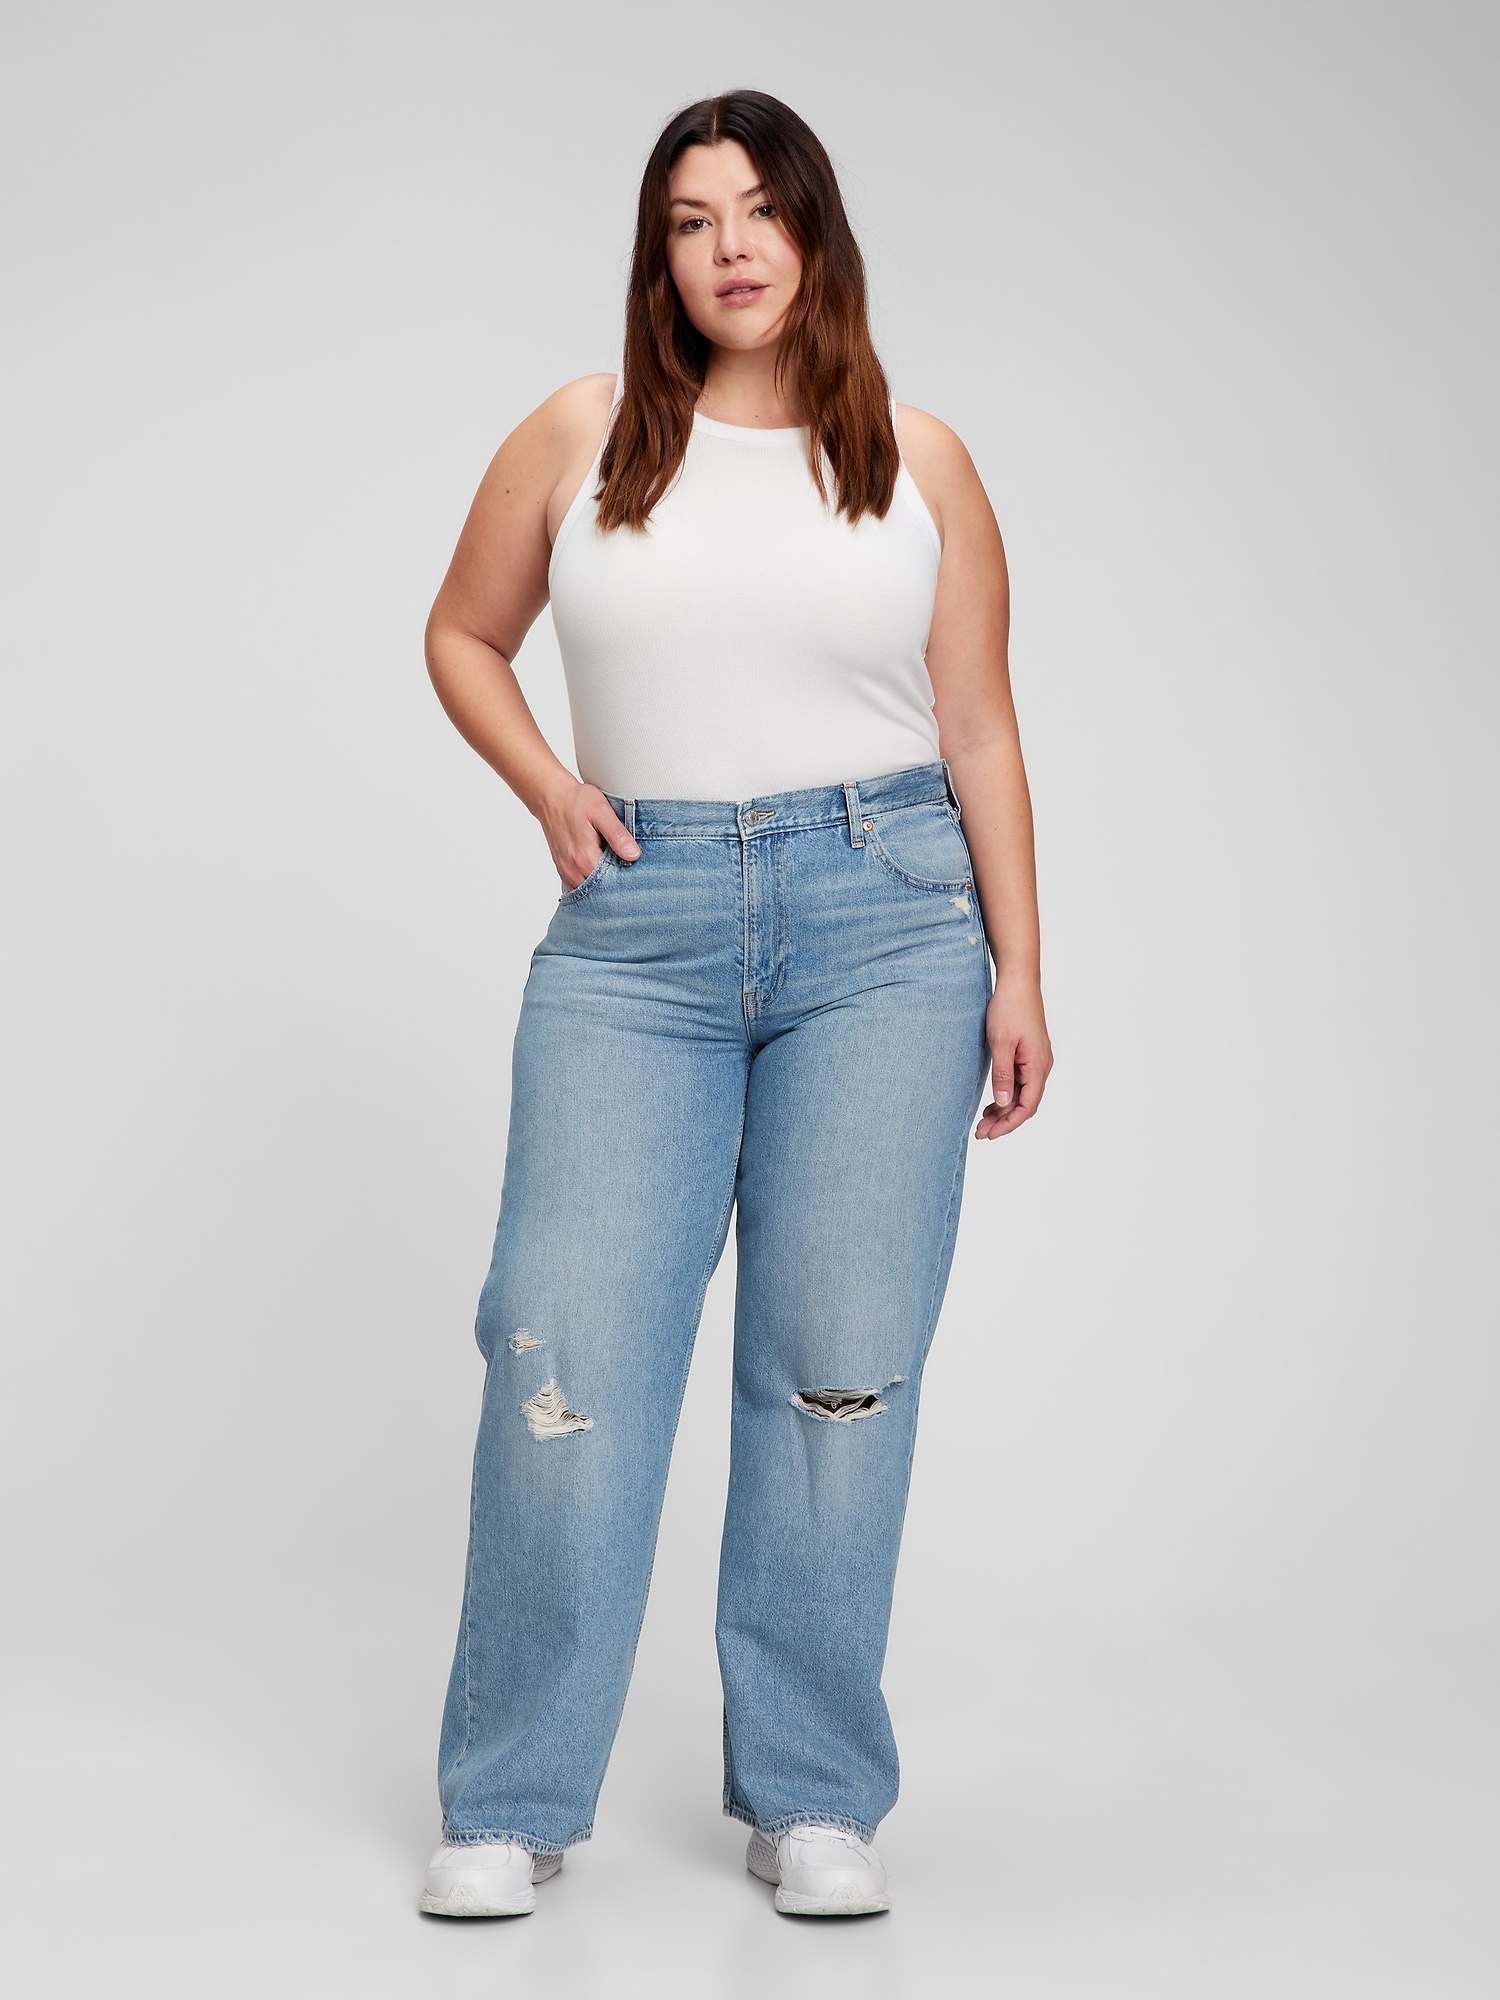 Low Rise Stride Jeans with Washwell | Gap